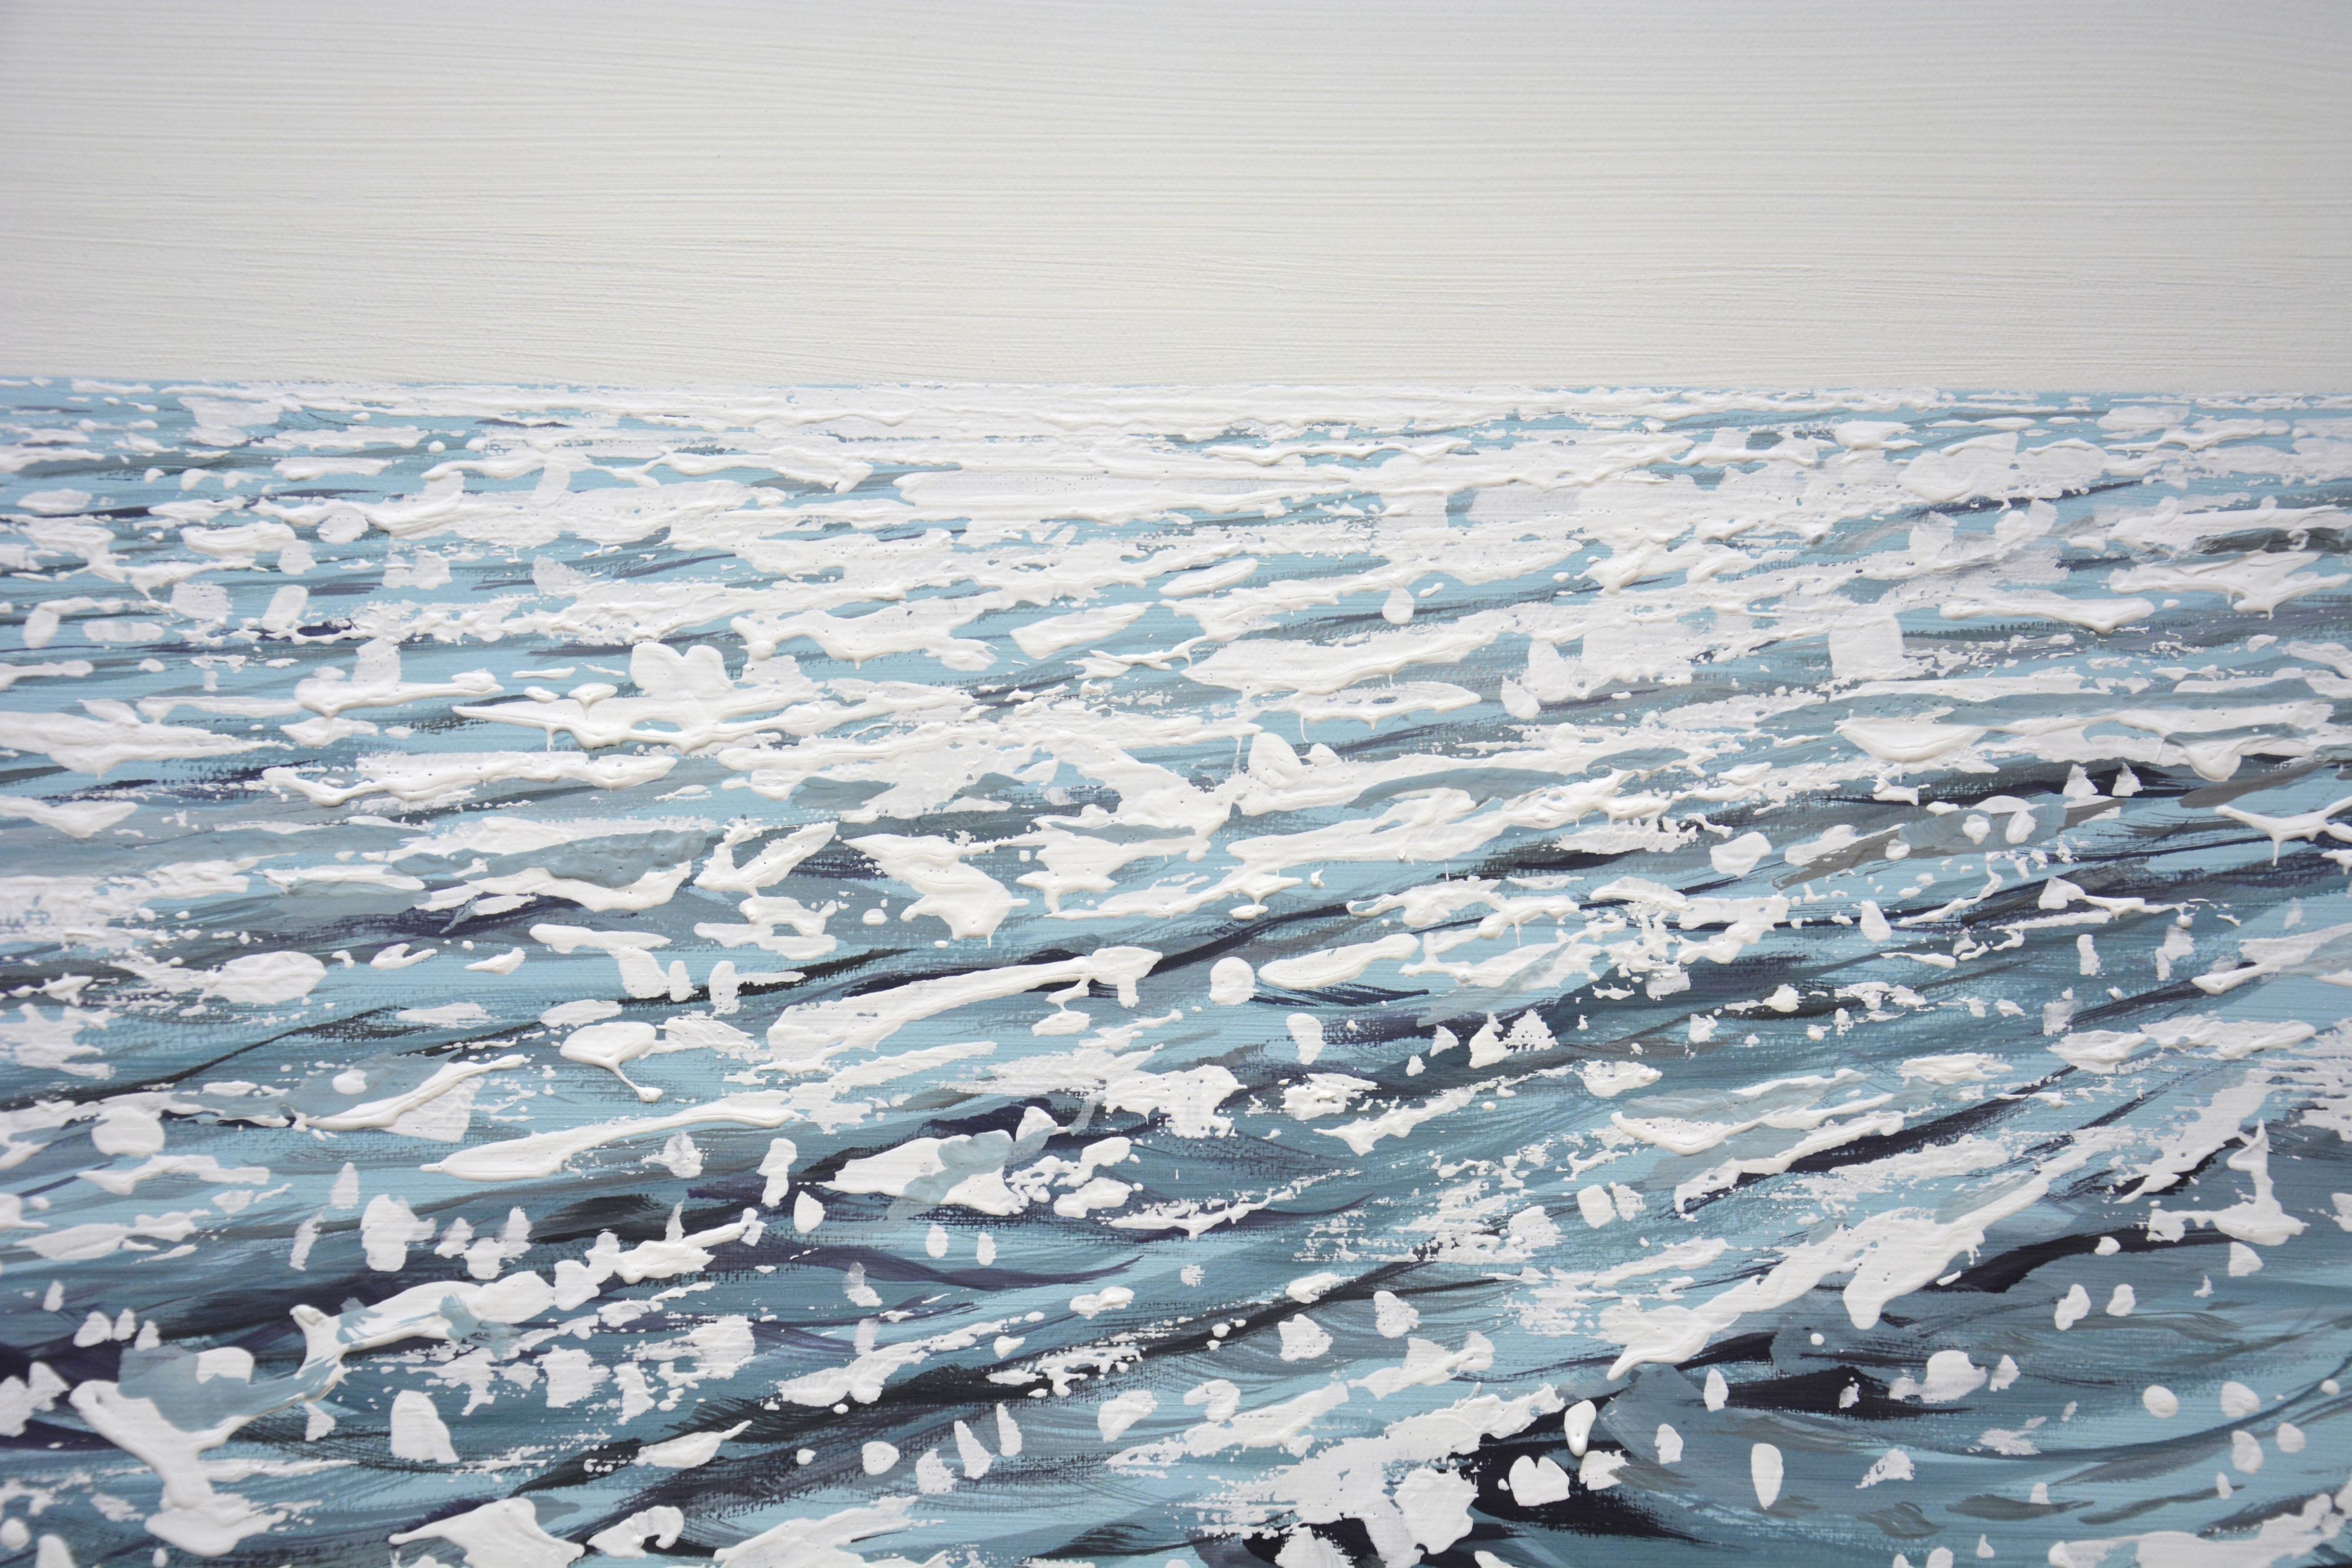 Silver of the ocean 3. Peace of mind. Calm motive, silvery water, ocean, glare on the water, light, small waves, clear sky create an atmosphere of relaxation and romance. Made in the style of realism, impressionism. The light gray and white palette